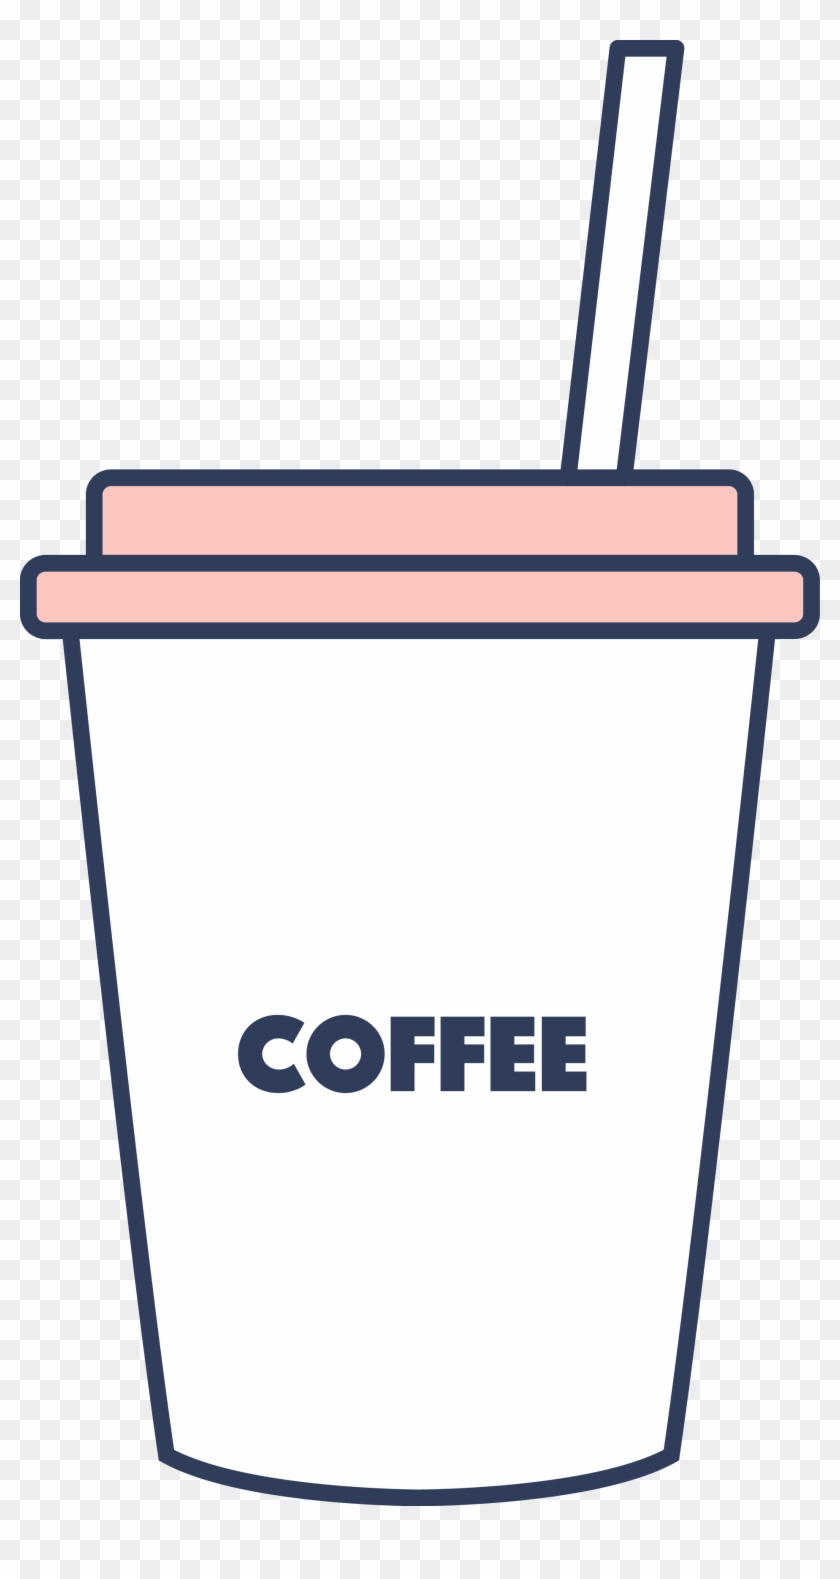 Coffee Cafe Cup Clip Art - Coffee Cafe Cup Clip Art #486988